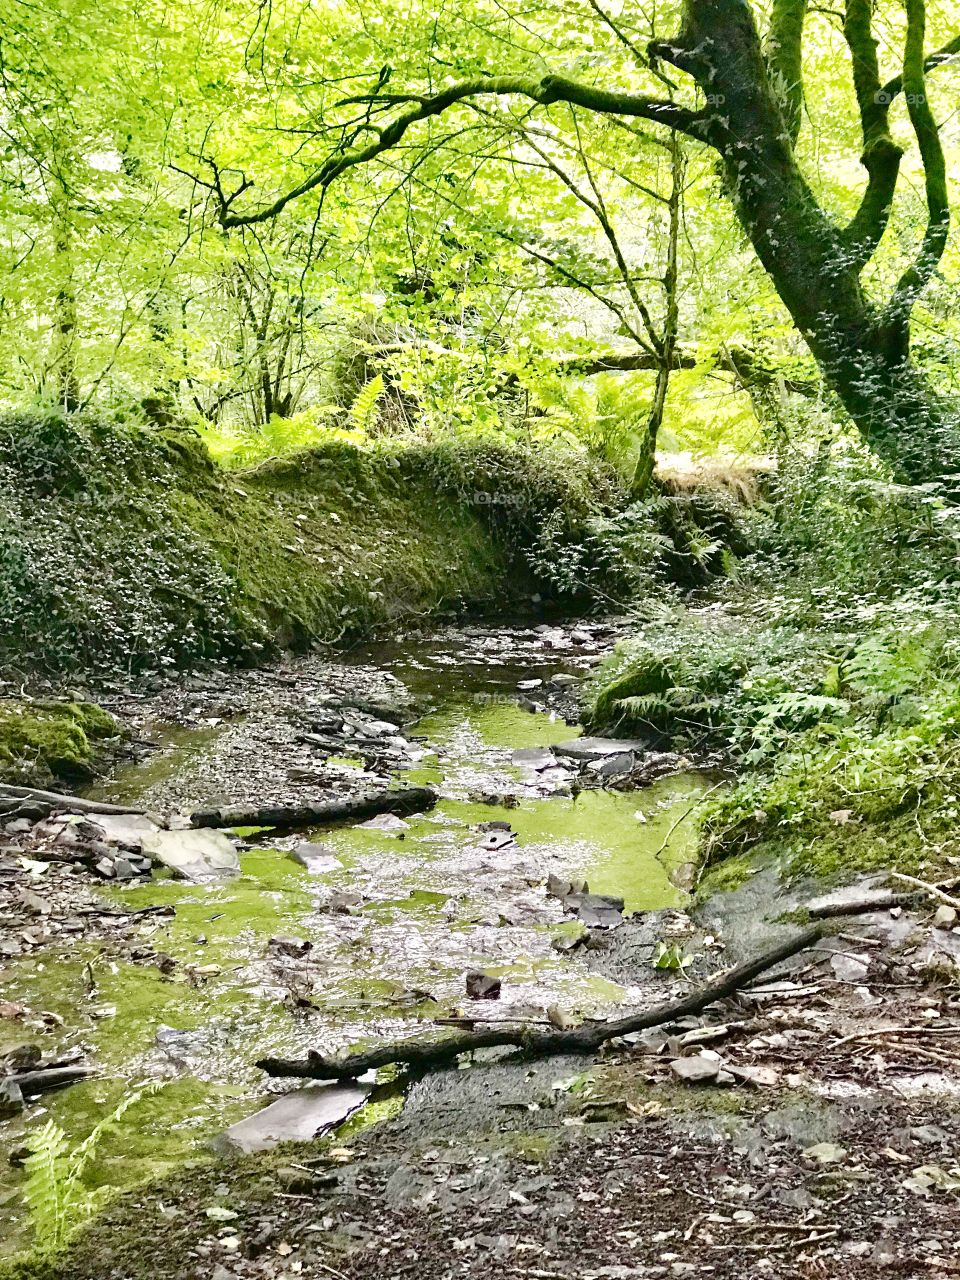 Pembrokeshire stream in Wales with woodland and peaceful calm and tranquil atmosphere for those who like mindfulness